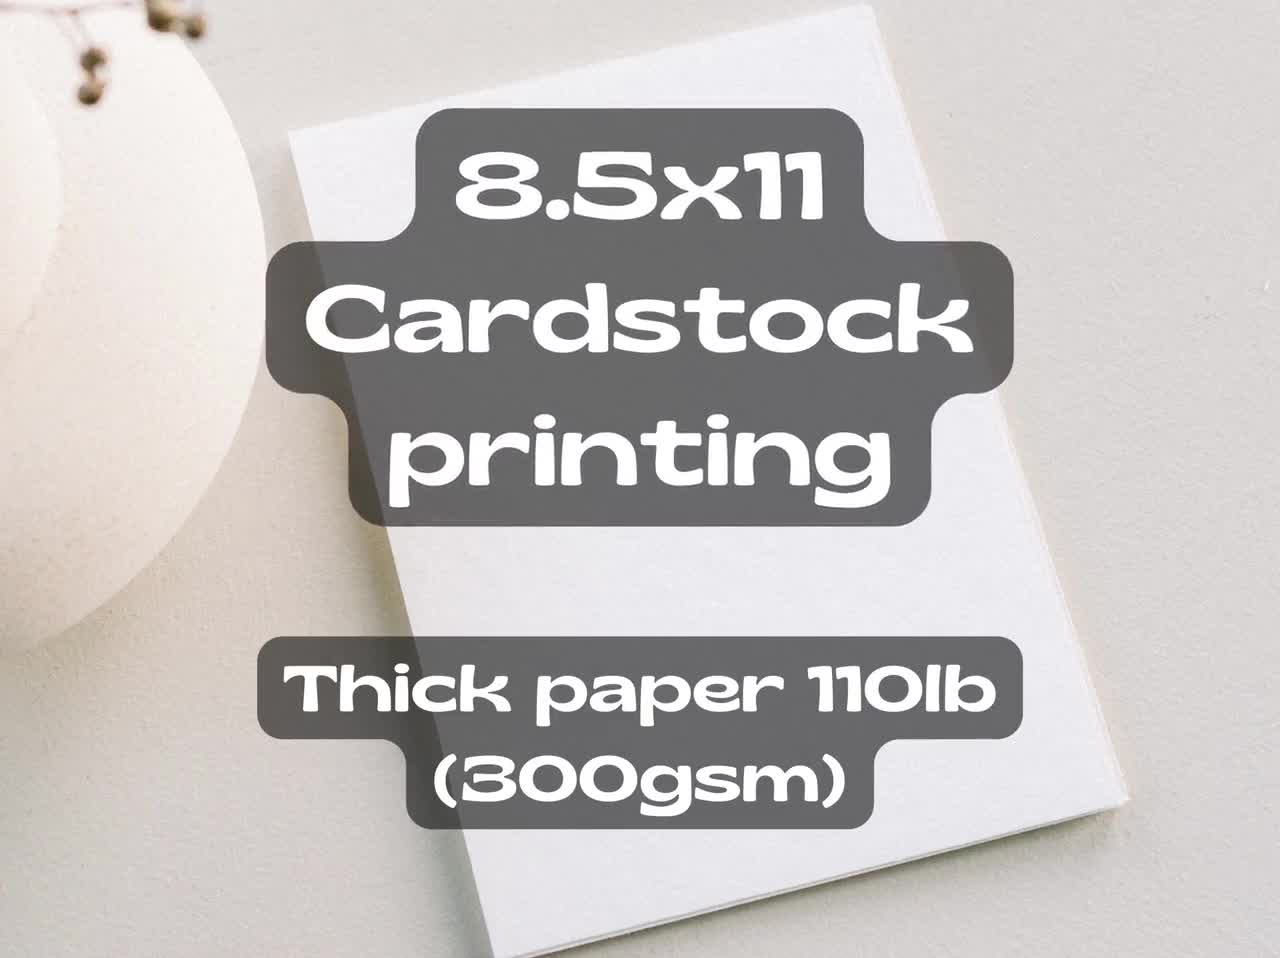 110 LB Cardstock Custom Printing, Double Side Printing Service Available  Printing Services on White Cardstock Extra Heavy Weight 300gsm 